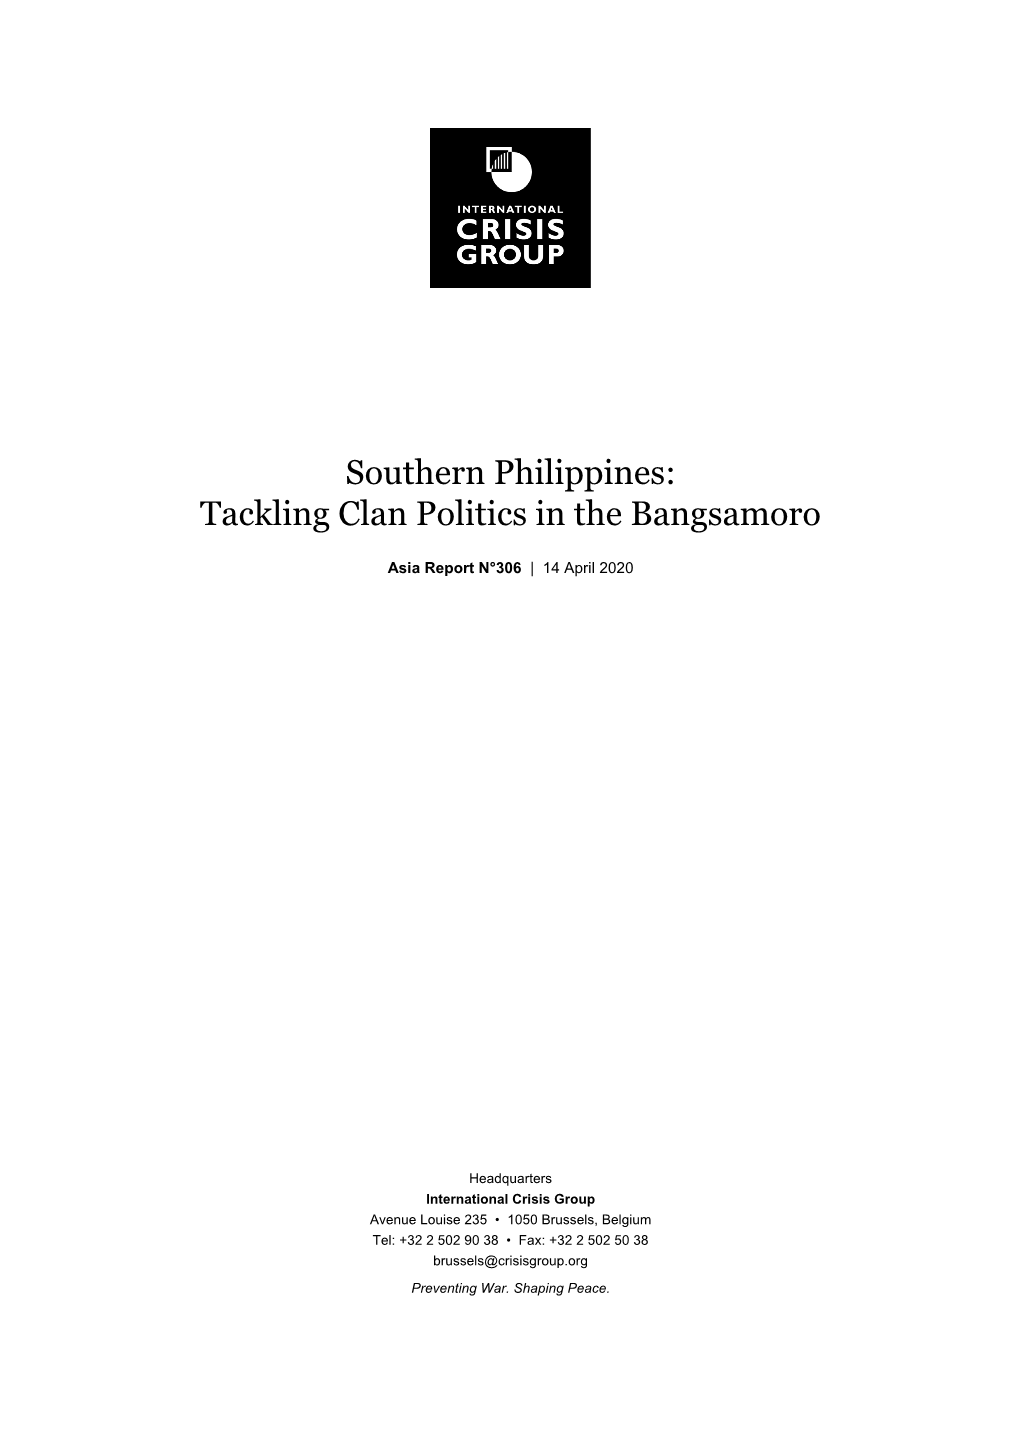 Southern Philippines: Tackling Clan Politics in the Bangsamoro